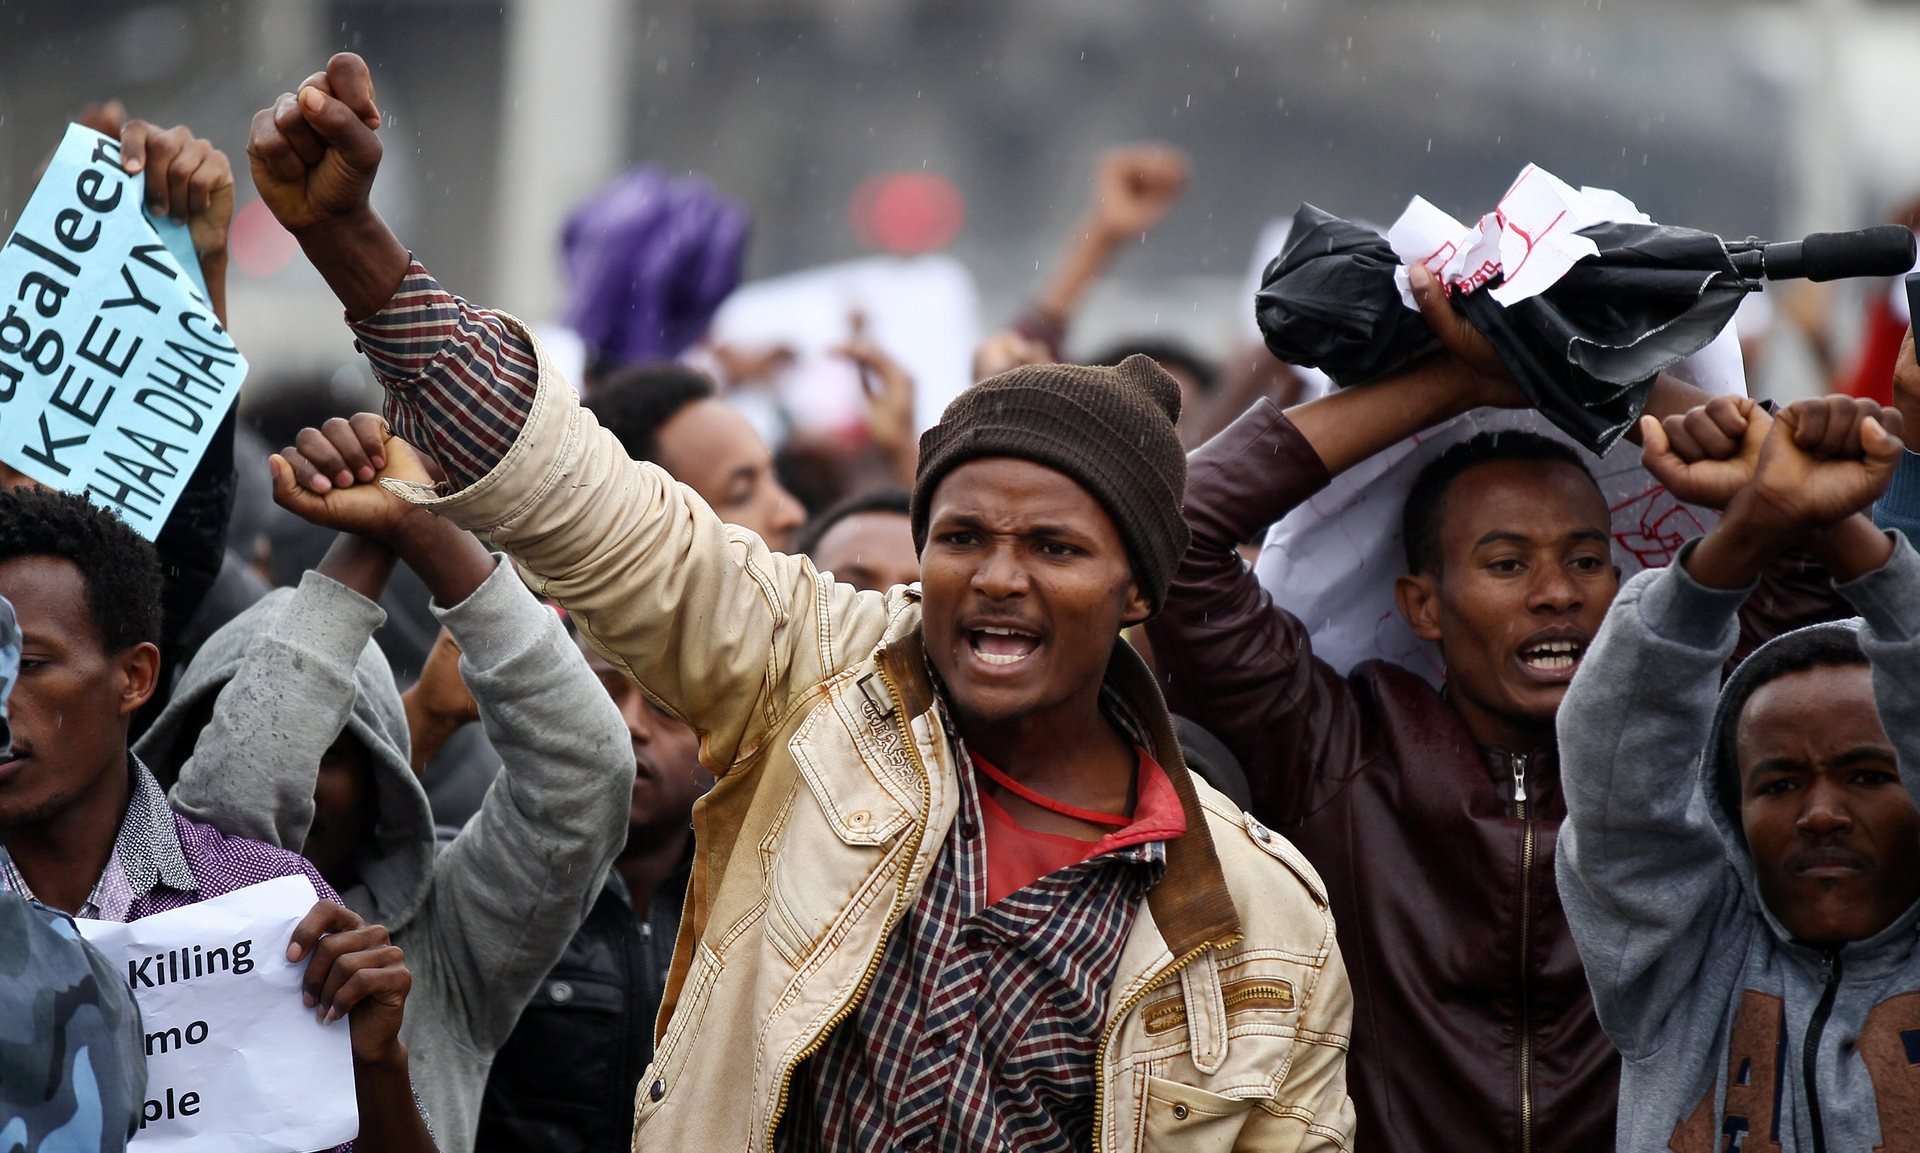 Protesters chant slogans during a demonstration over what they say is unfair distribution of wealth in the country at Meskel Square in Ethiopia’s capital Addis Ababa. Photograph: Tiksa Negeri/Reuters